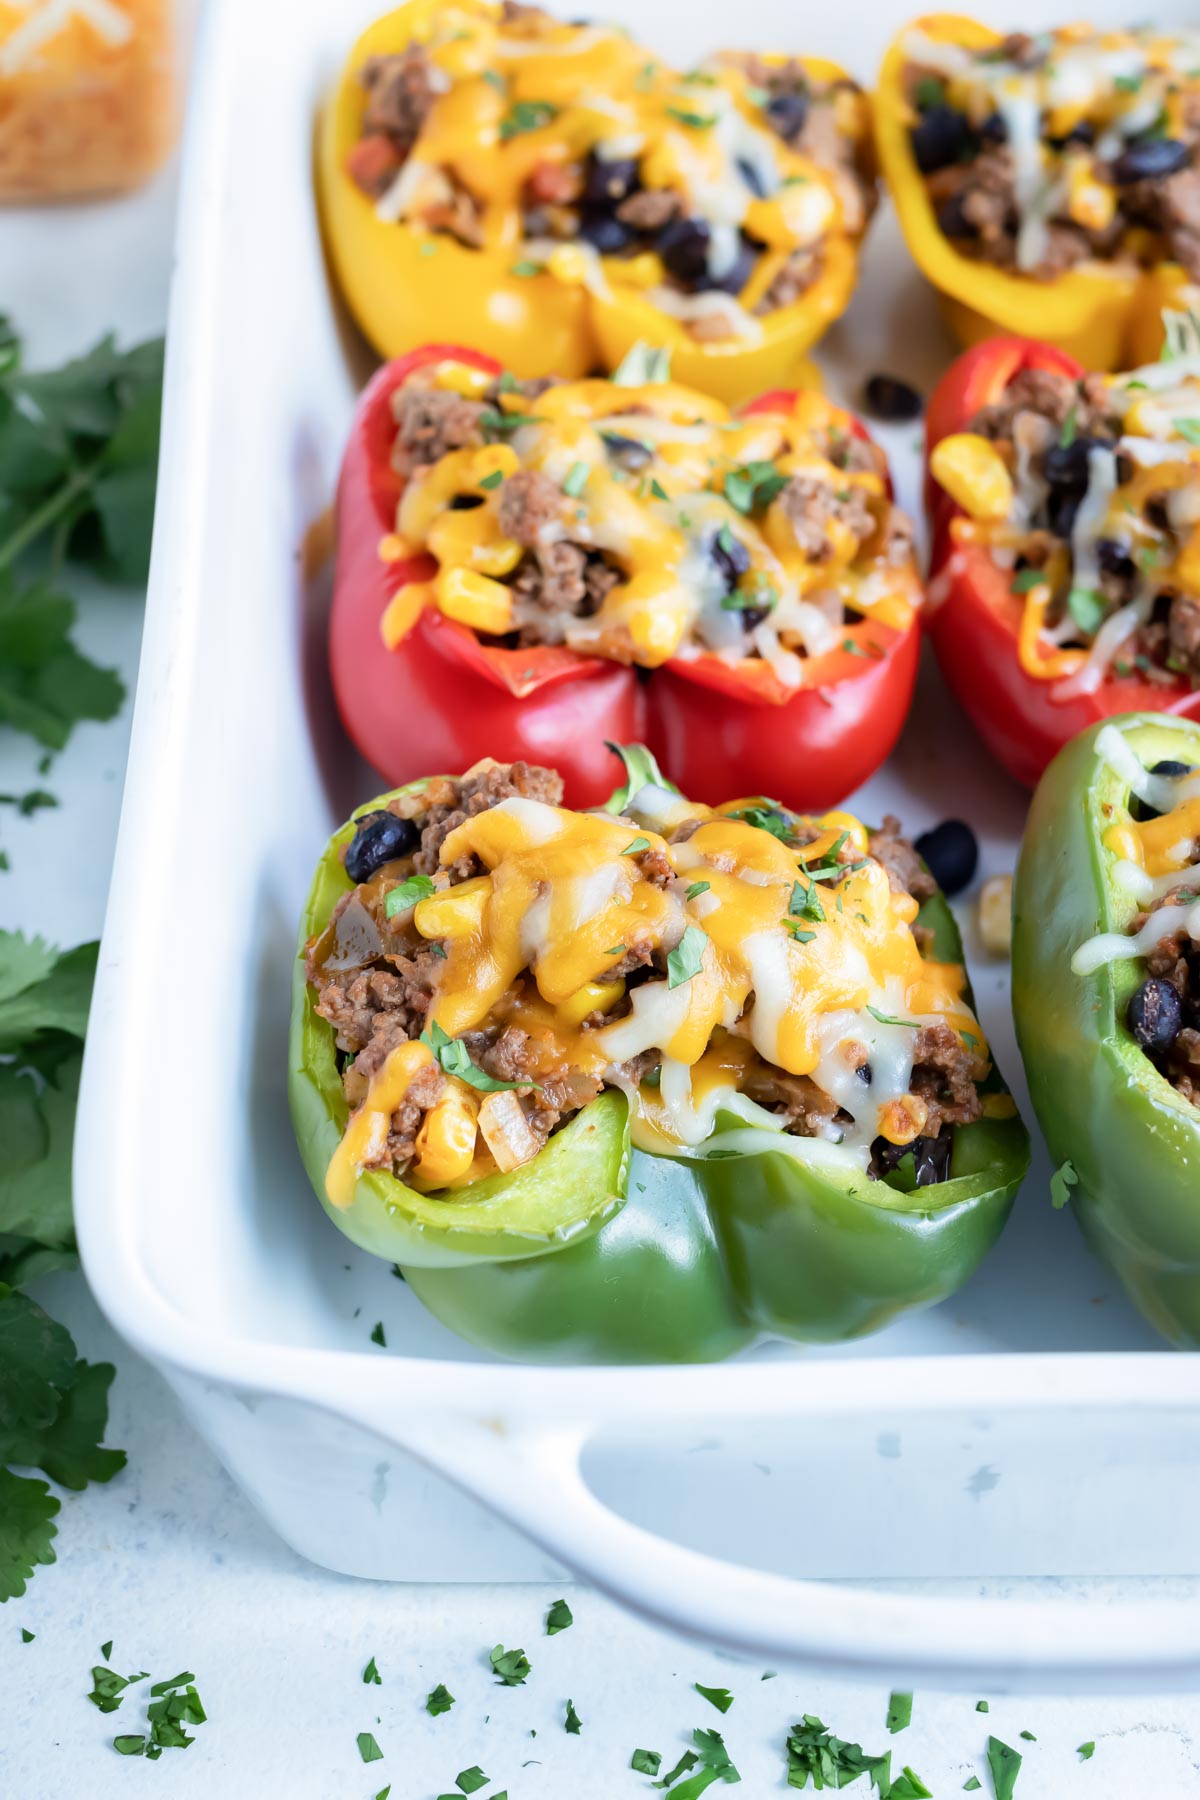 Low-carb Stuffed Bell Peppers are served for a main dish with taco flavors.